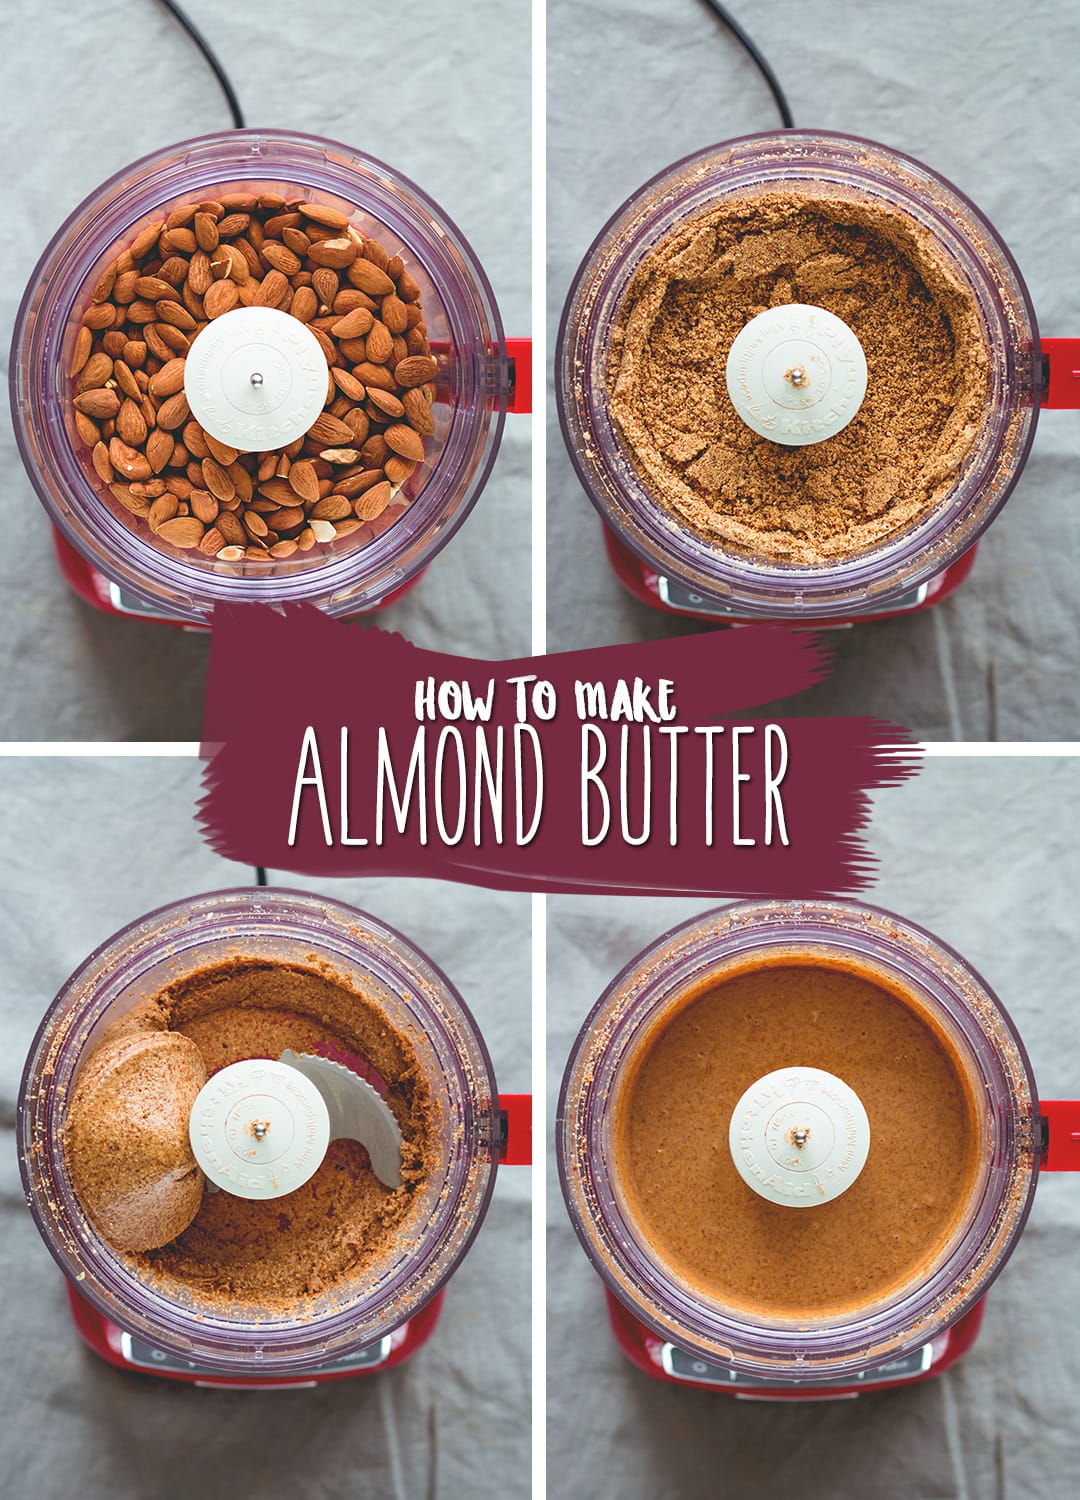 How to Make Almond Butter - homemade almond butter is much tastier than store-bought and extremely easy to make! You'll love making your own. Enjoy plain or try one of my recommended flavors! | thehealthfulideas.com